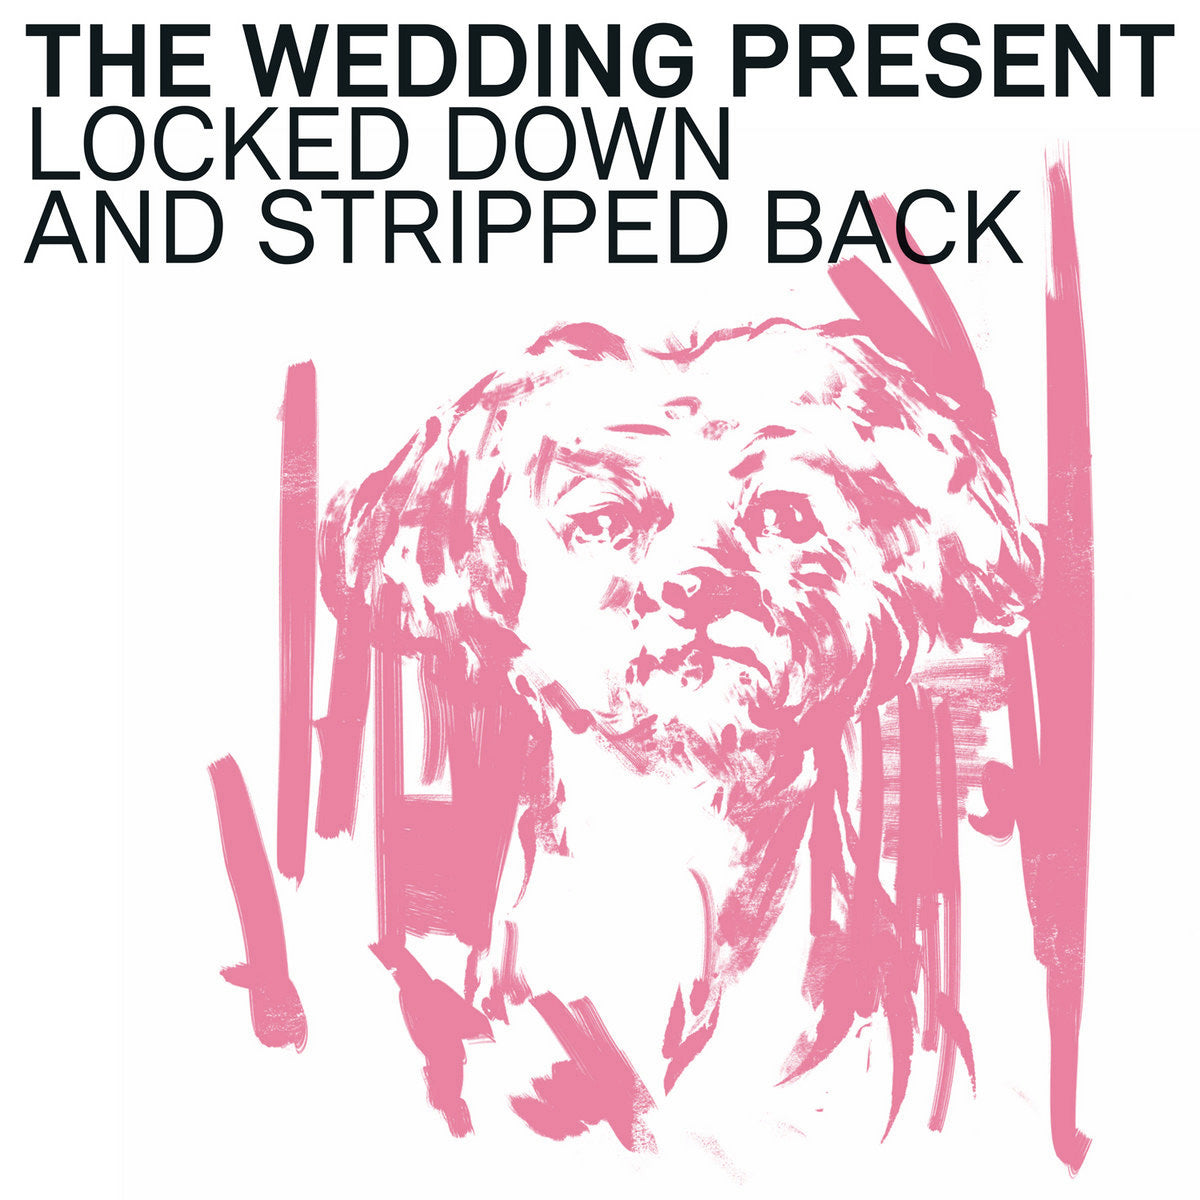 Wedding Present "Locked Down and Stripped Back" Vol. 1 LP (2021)